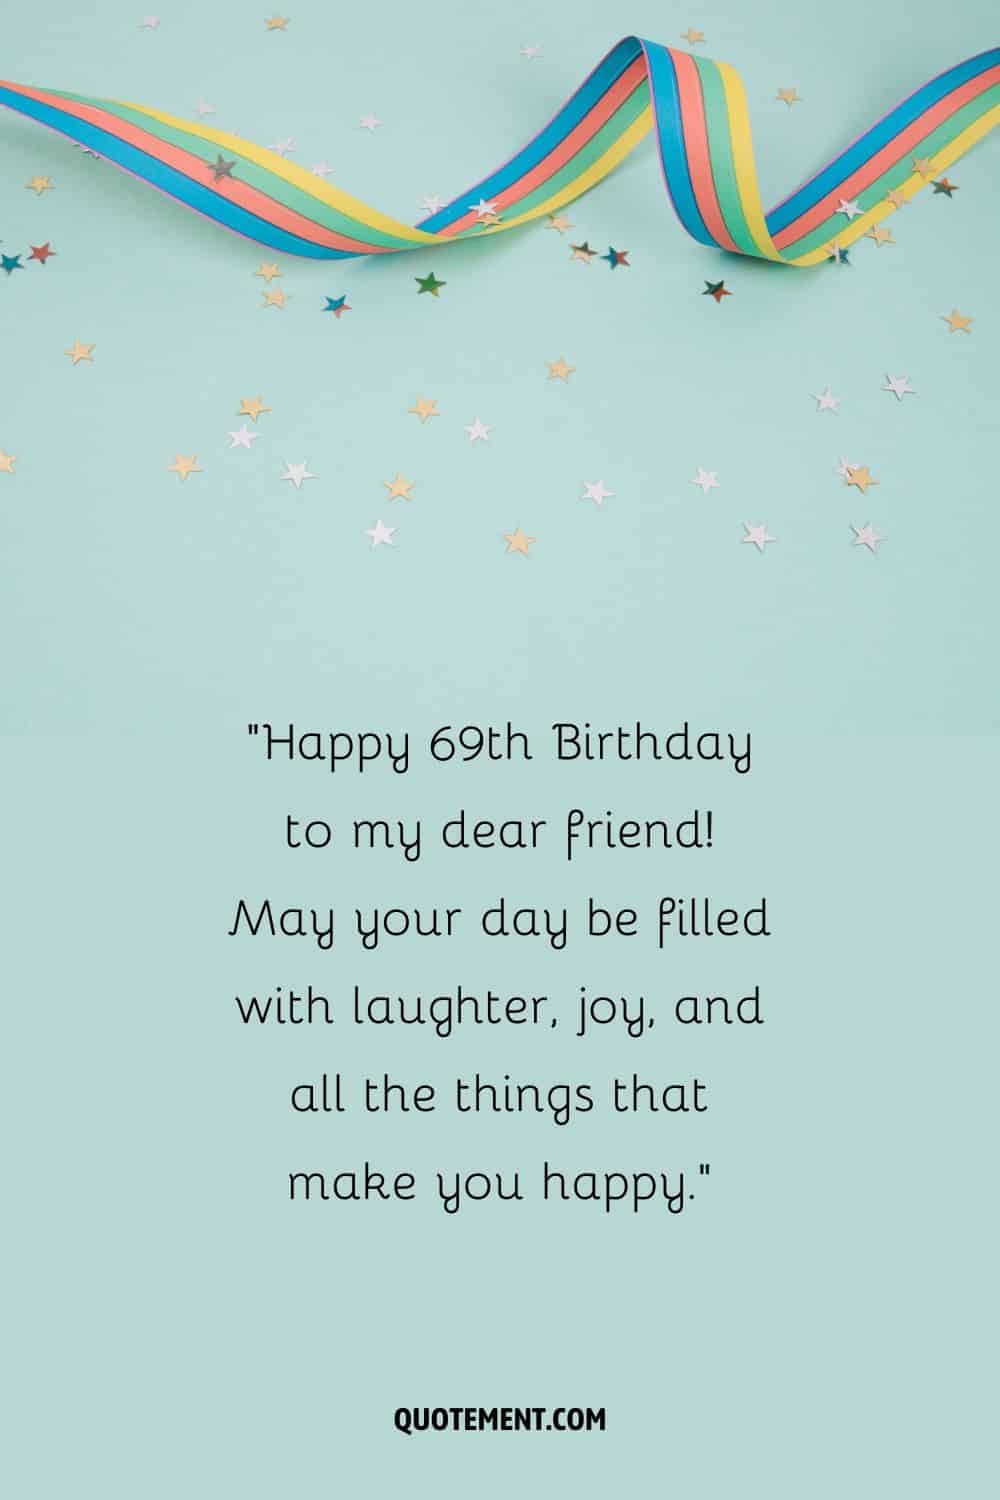 Happy 69th Birthday to my dear friend! May your day be filled with laughter, joy, and all the things that make you happy